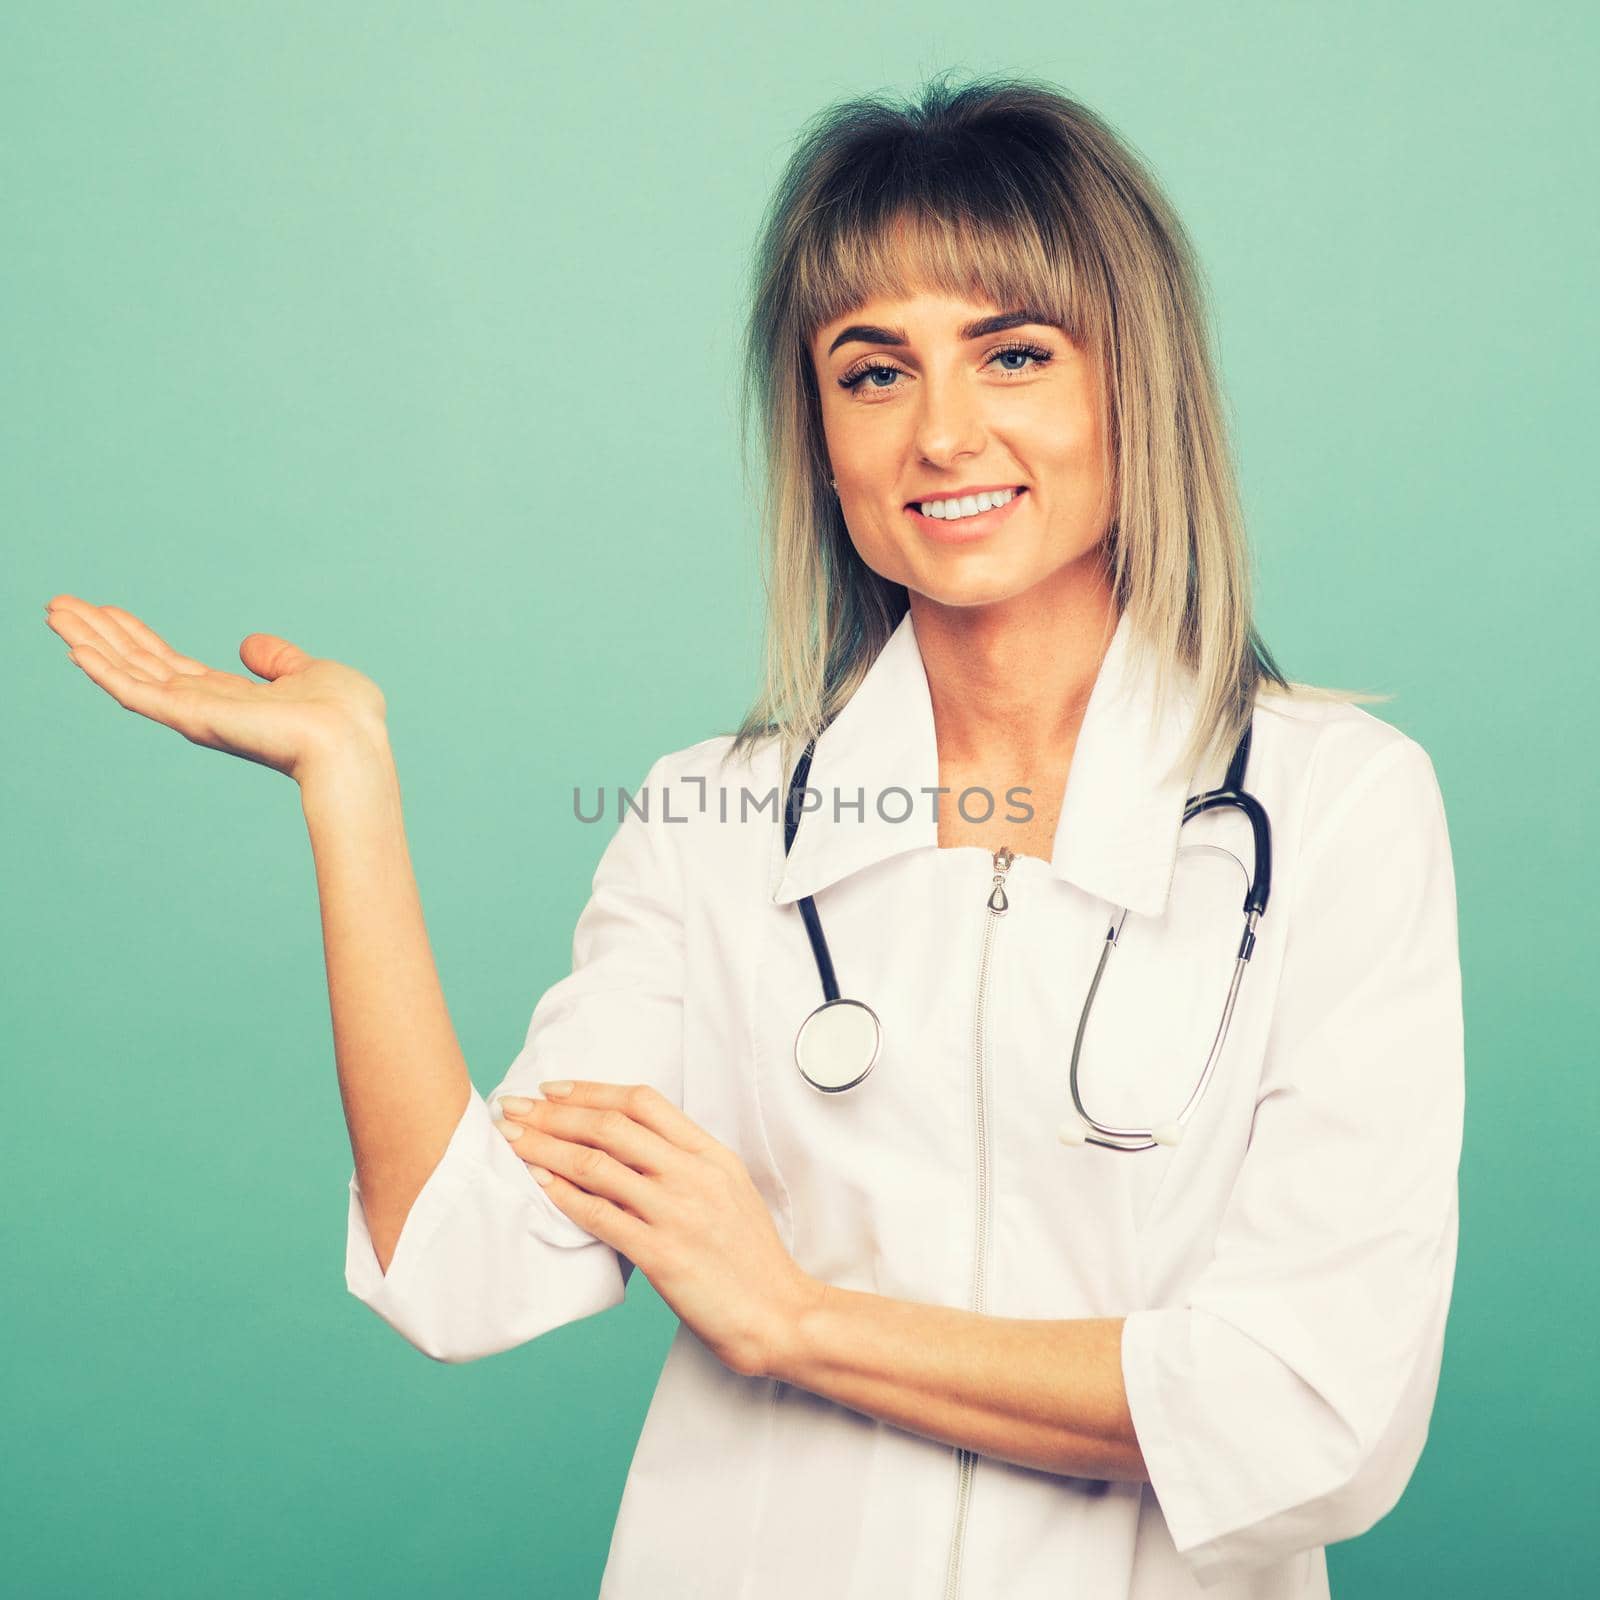 Smiling young female doctor with a stethoscope shows something on the palm on a blue background